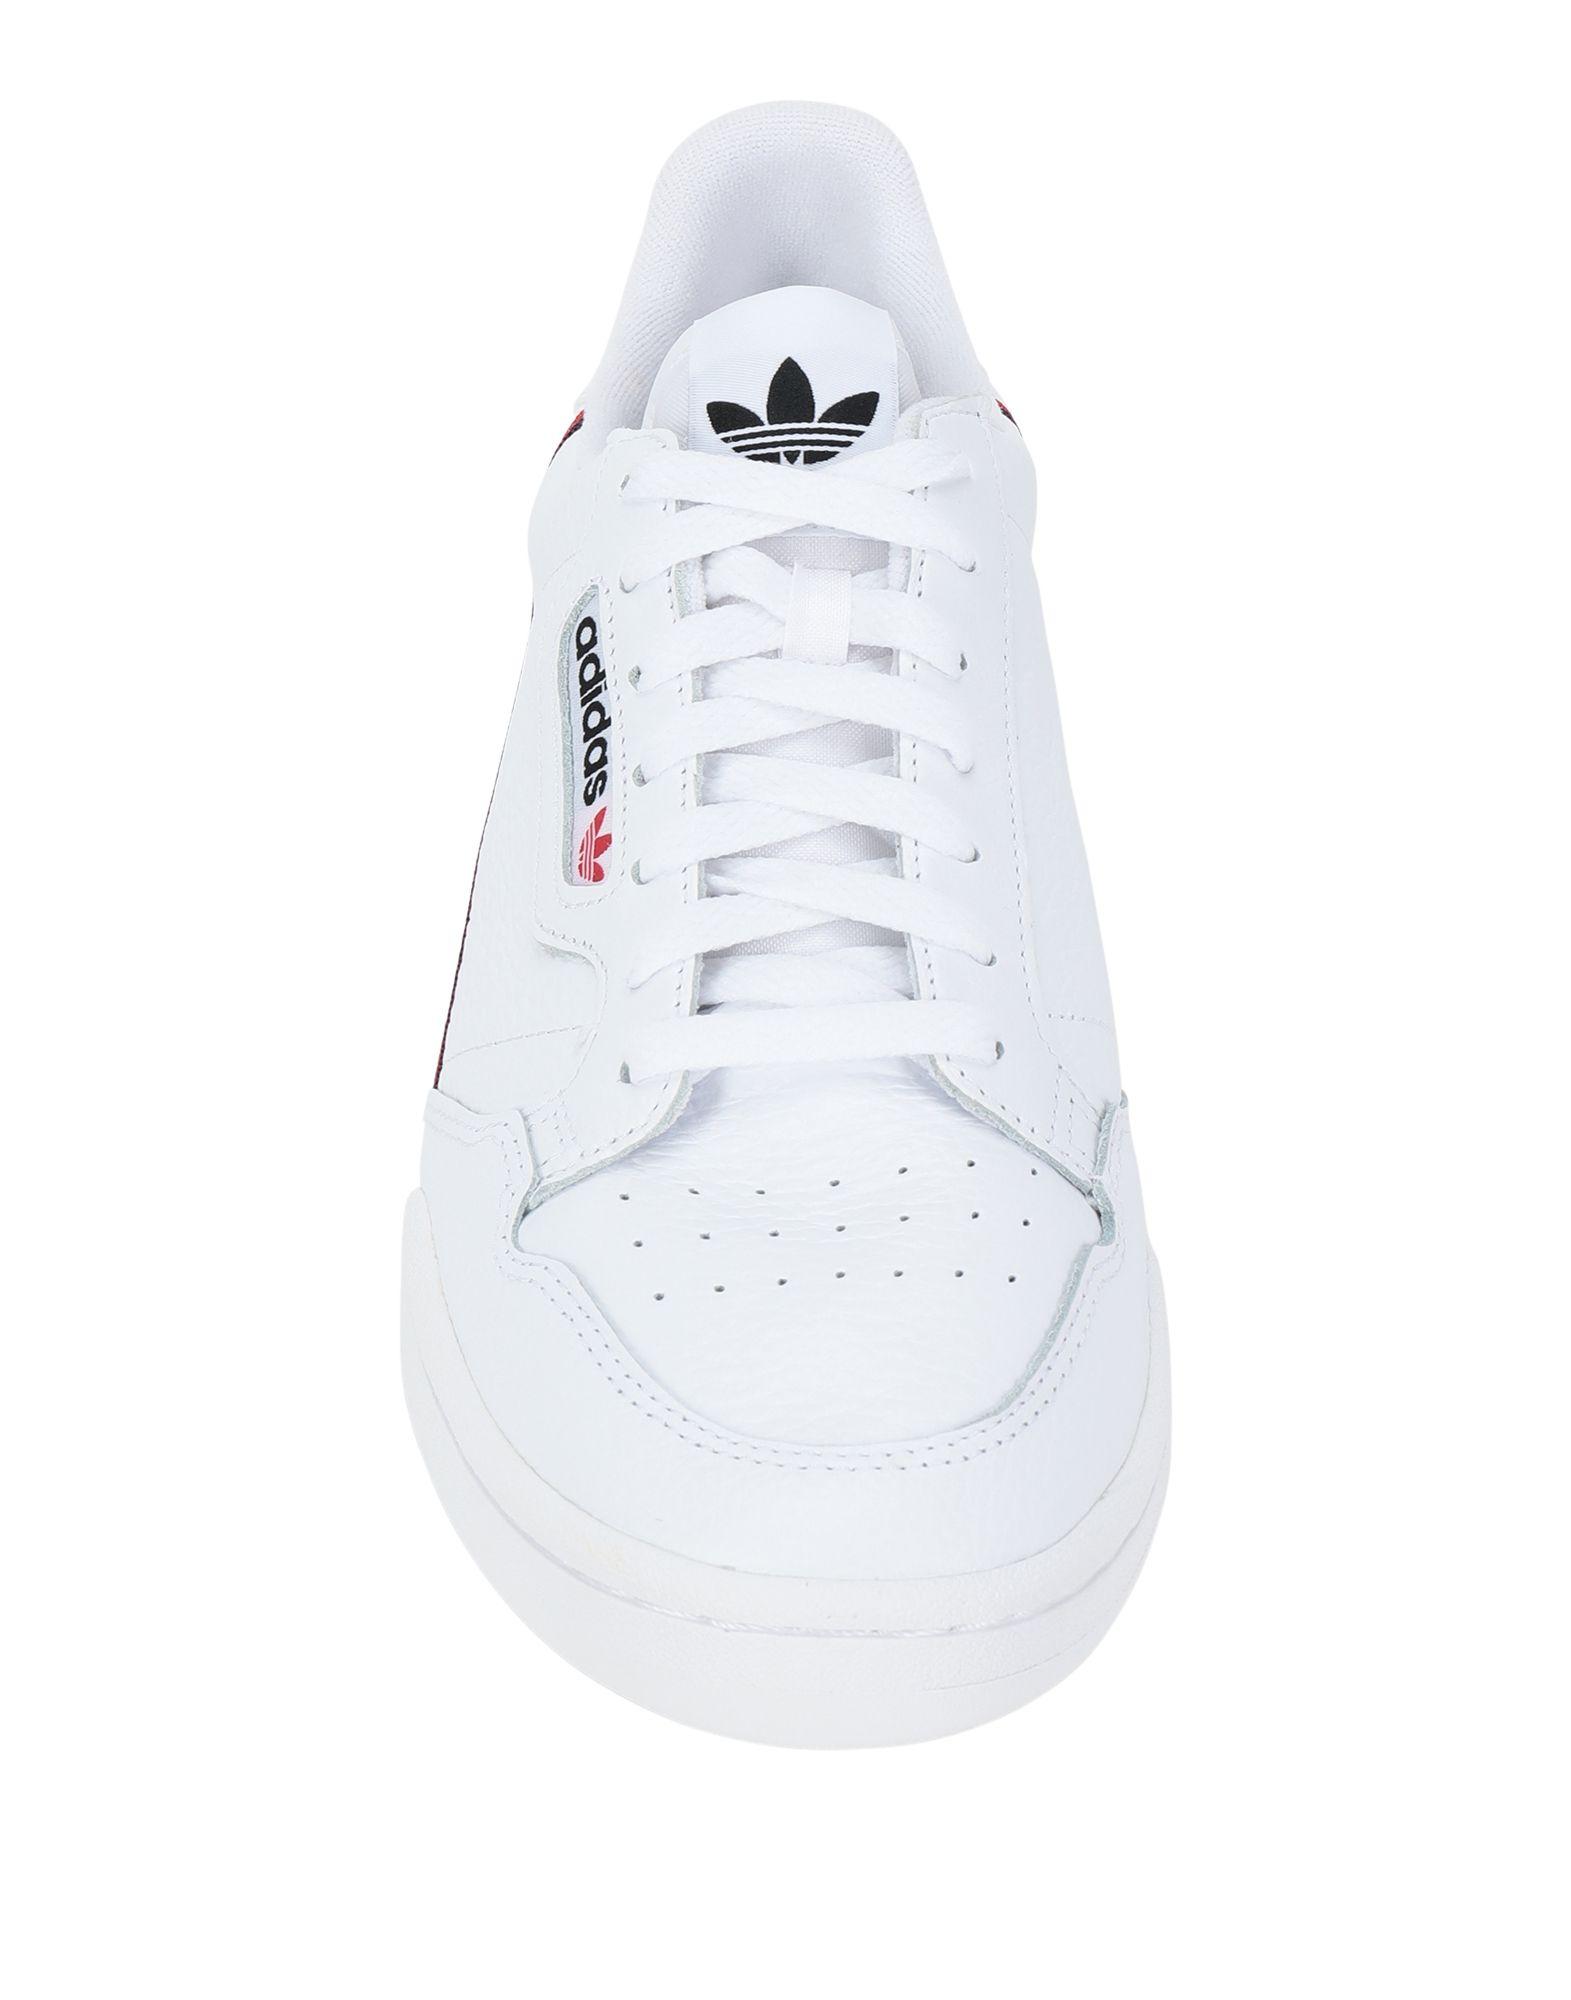 adidas Originals Leather Low-tops & Sneakers in White for Men - Lyst